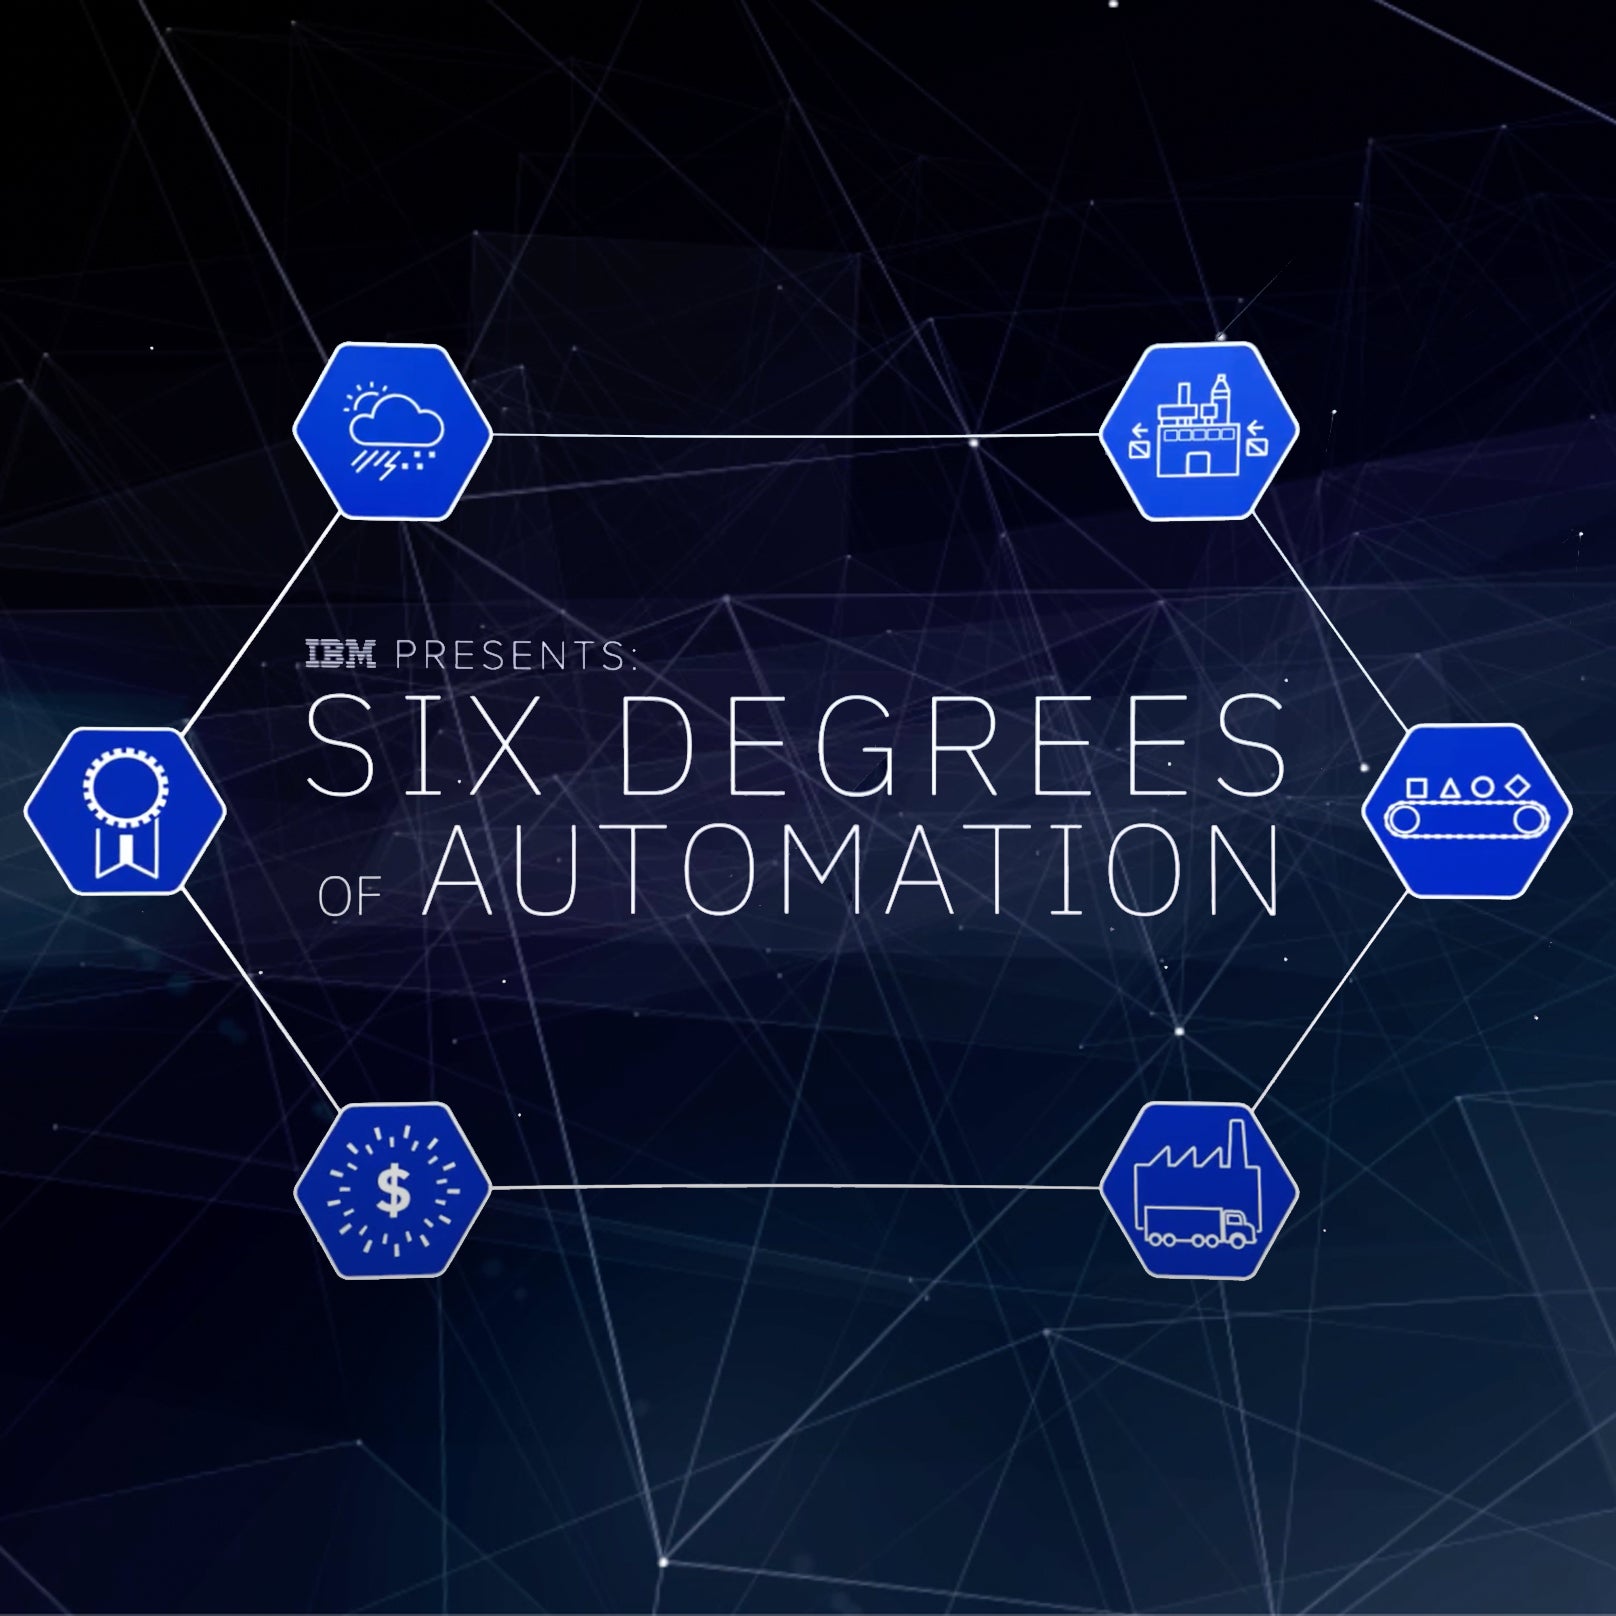 BRAND FILM SERIES FOR IBM AUTOMATION: SIX DEGREES OF AUTOMATION